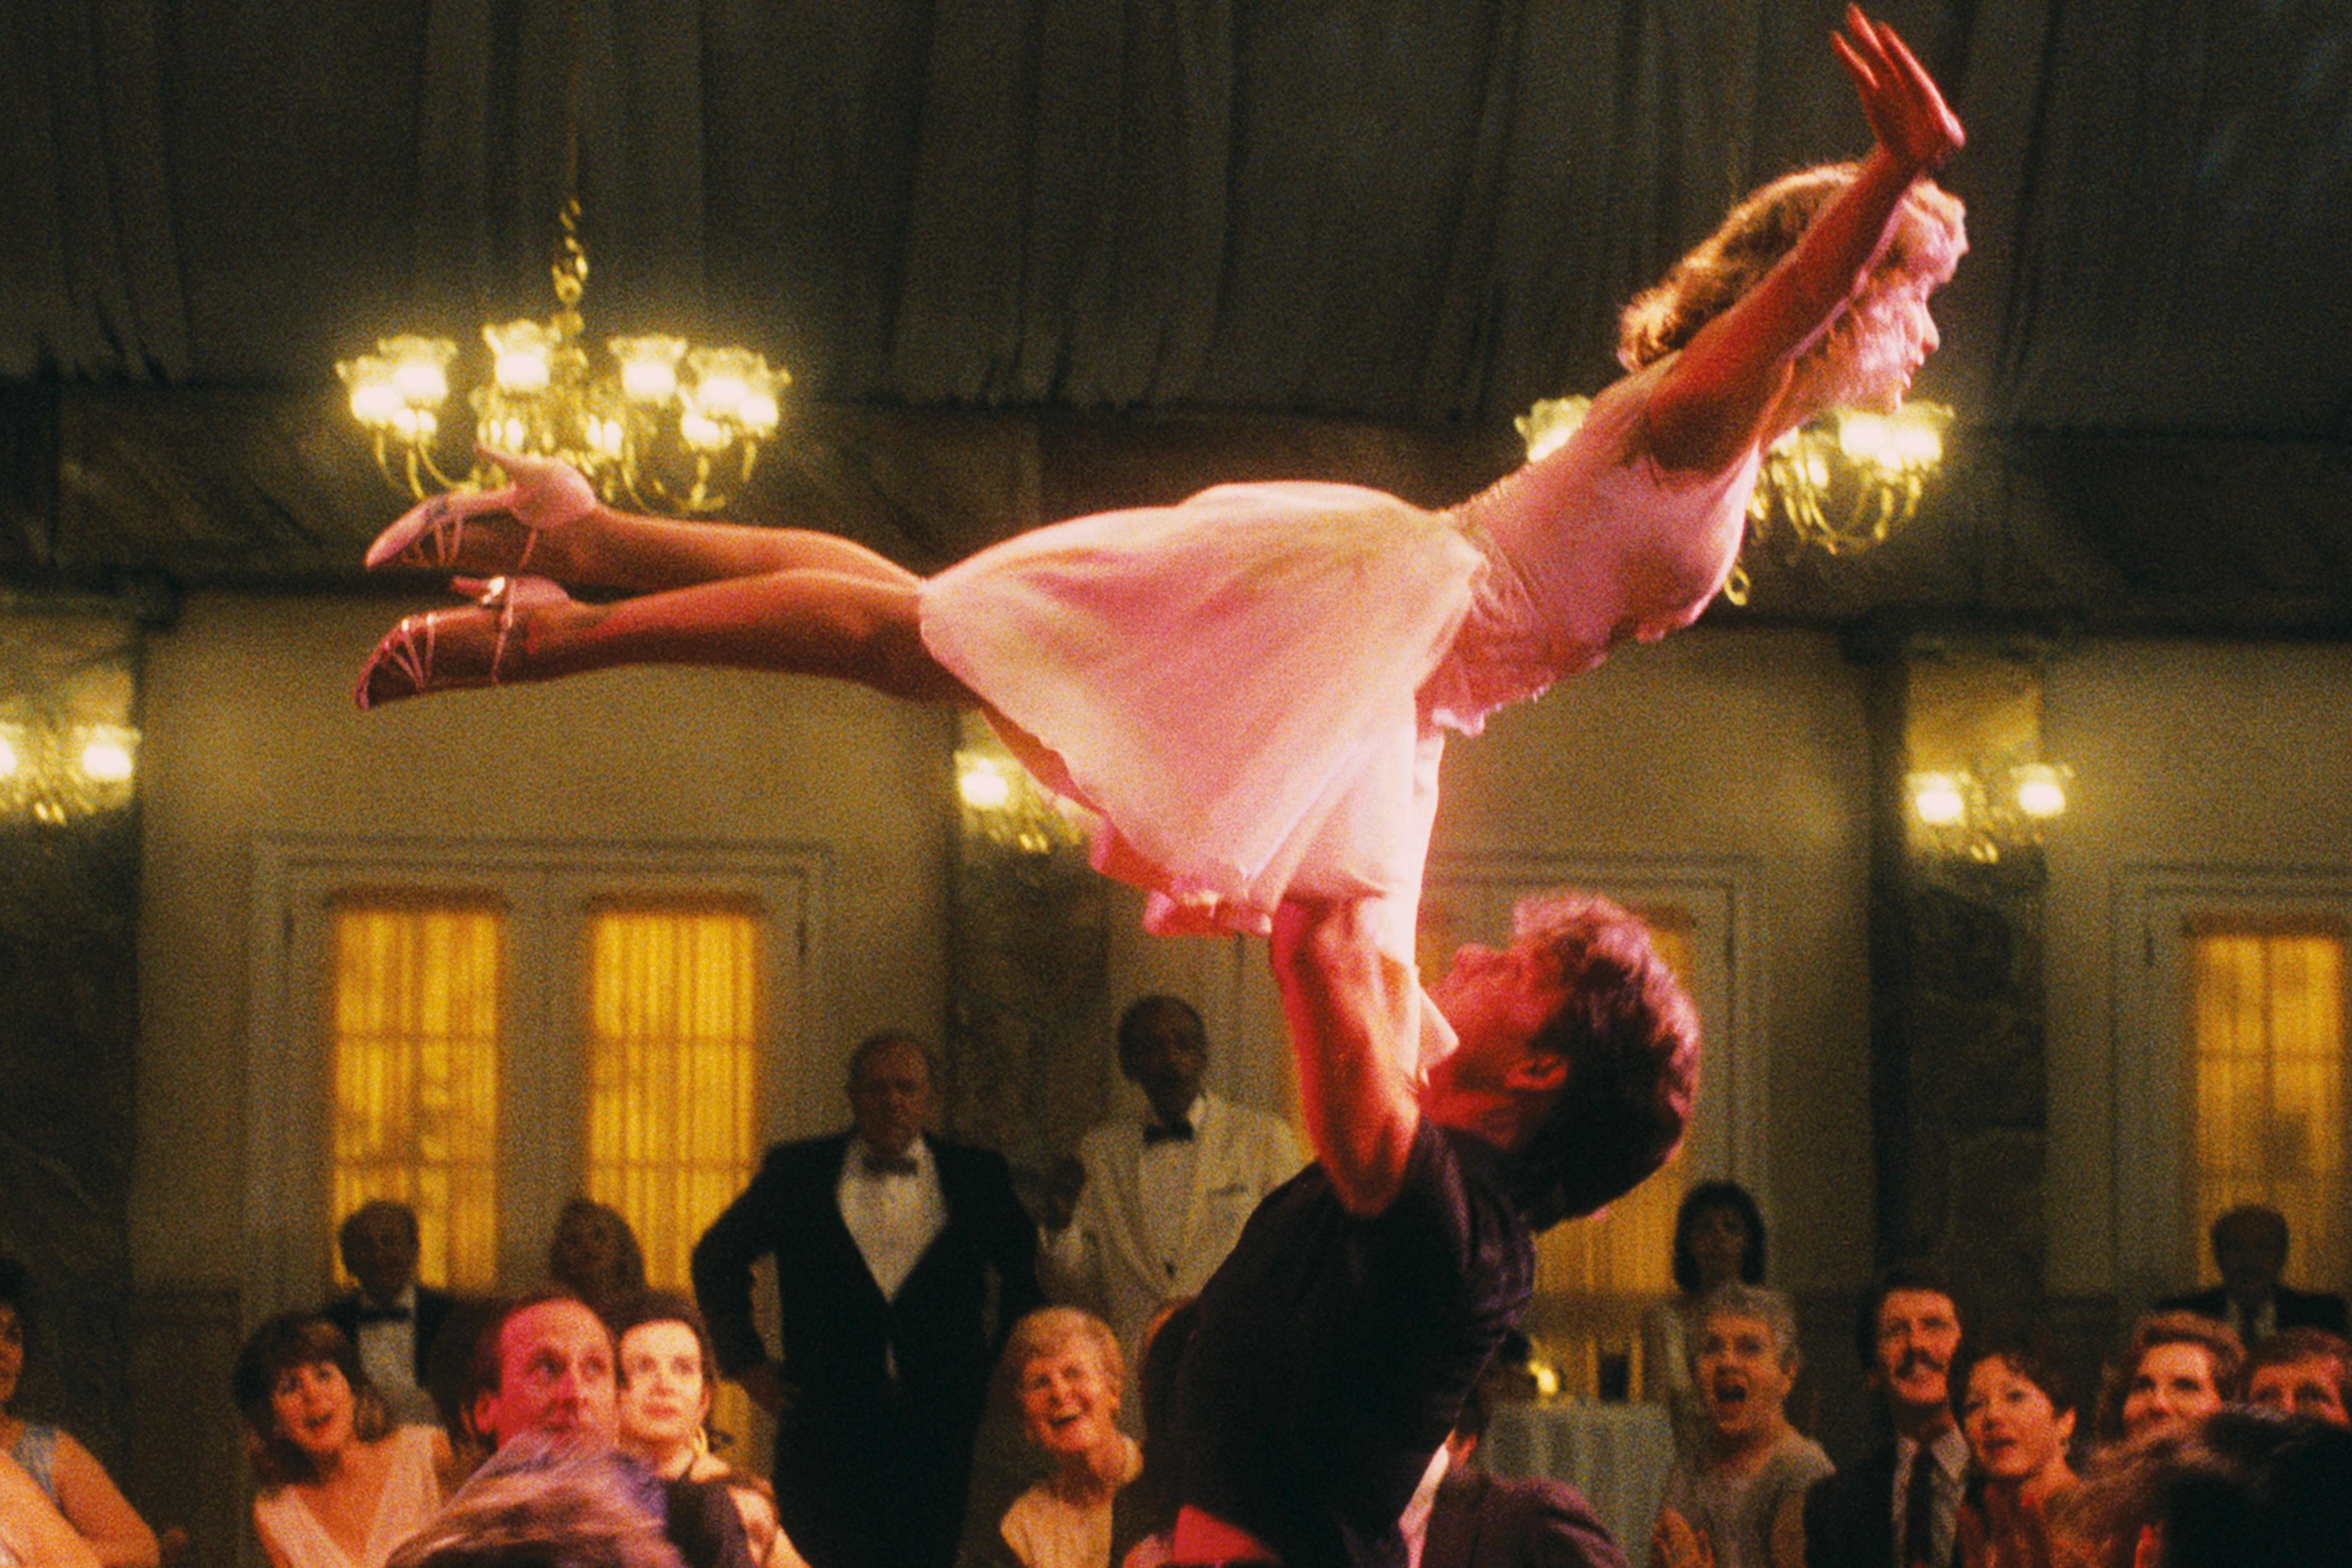 Movie memories: the Eighties romantic drama ‘Dirty Dancing’ was a staple of Lucy Thackray’s friendship